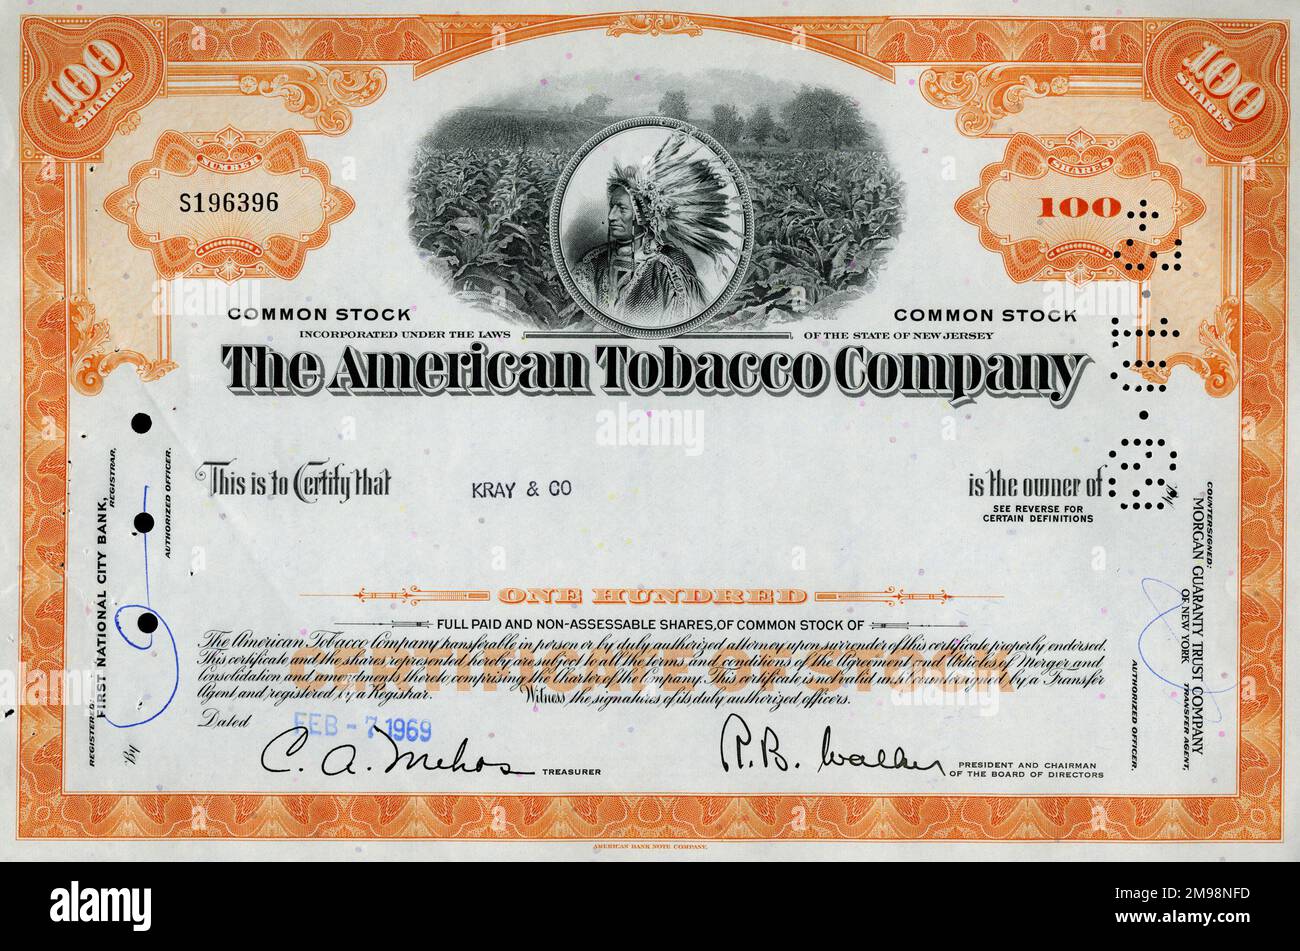 Stock Share Certificate - The American Tobacco Company, 100 shares. Stock Photo